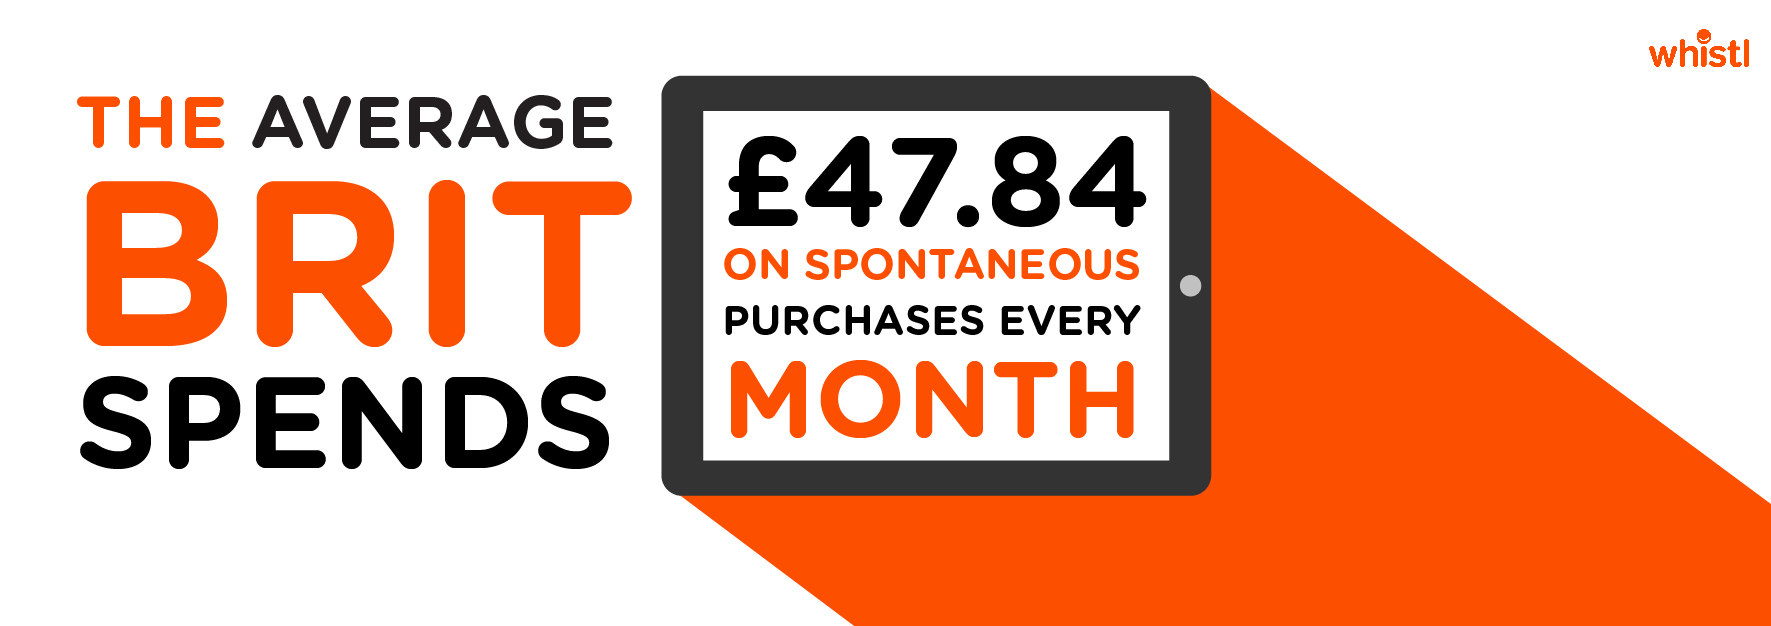 The average Brit spends £47.84 on spontaneous purchases every month.jpg